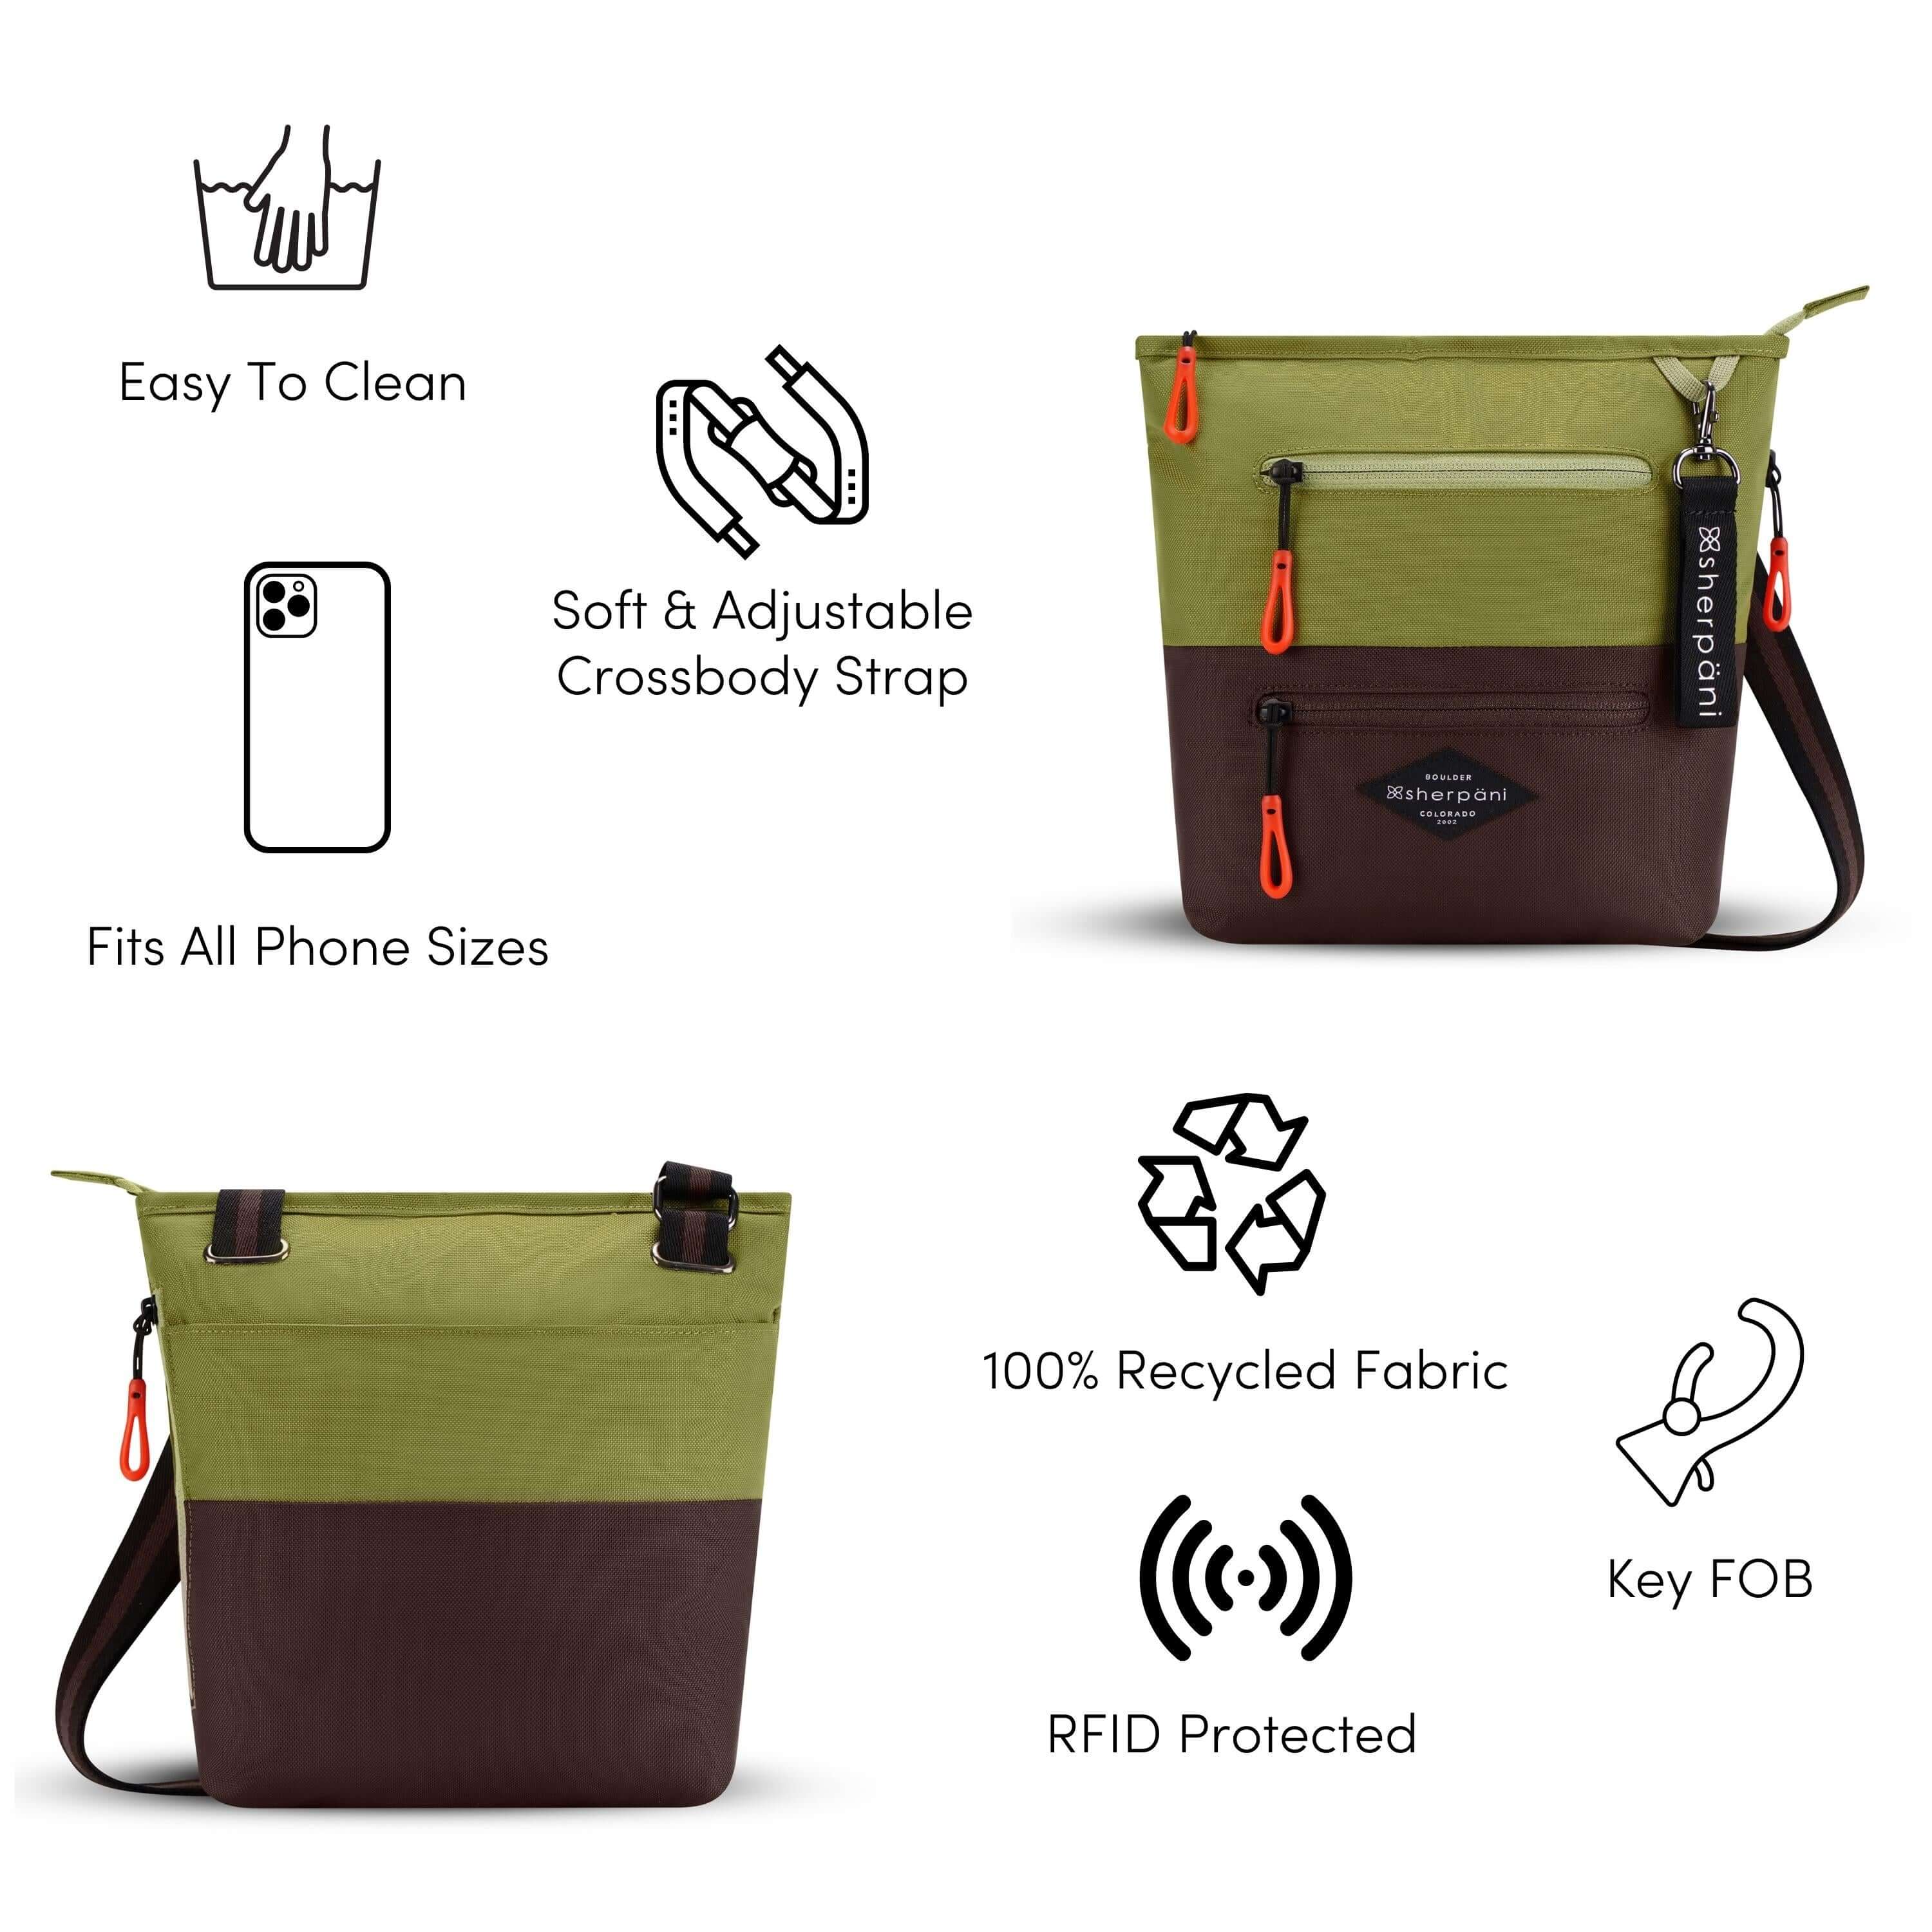 A Graphic showing the features of Sherpani's crossbody, the Sadie. There is a front and back view of the bag. The following features are highlighted with corresponding graphics: Easy To Clean, Soft & Adjustable Crossbody Strap, Fits All Phone Sizes, 1% Recycled Fabric, Key FOB, RFID Protected. 